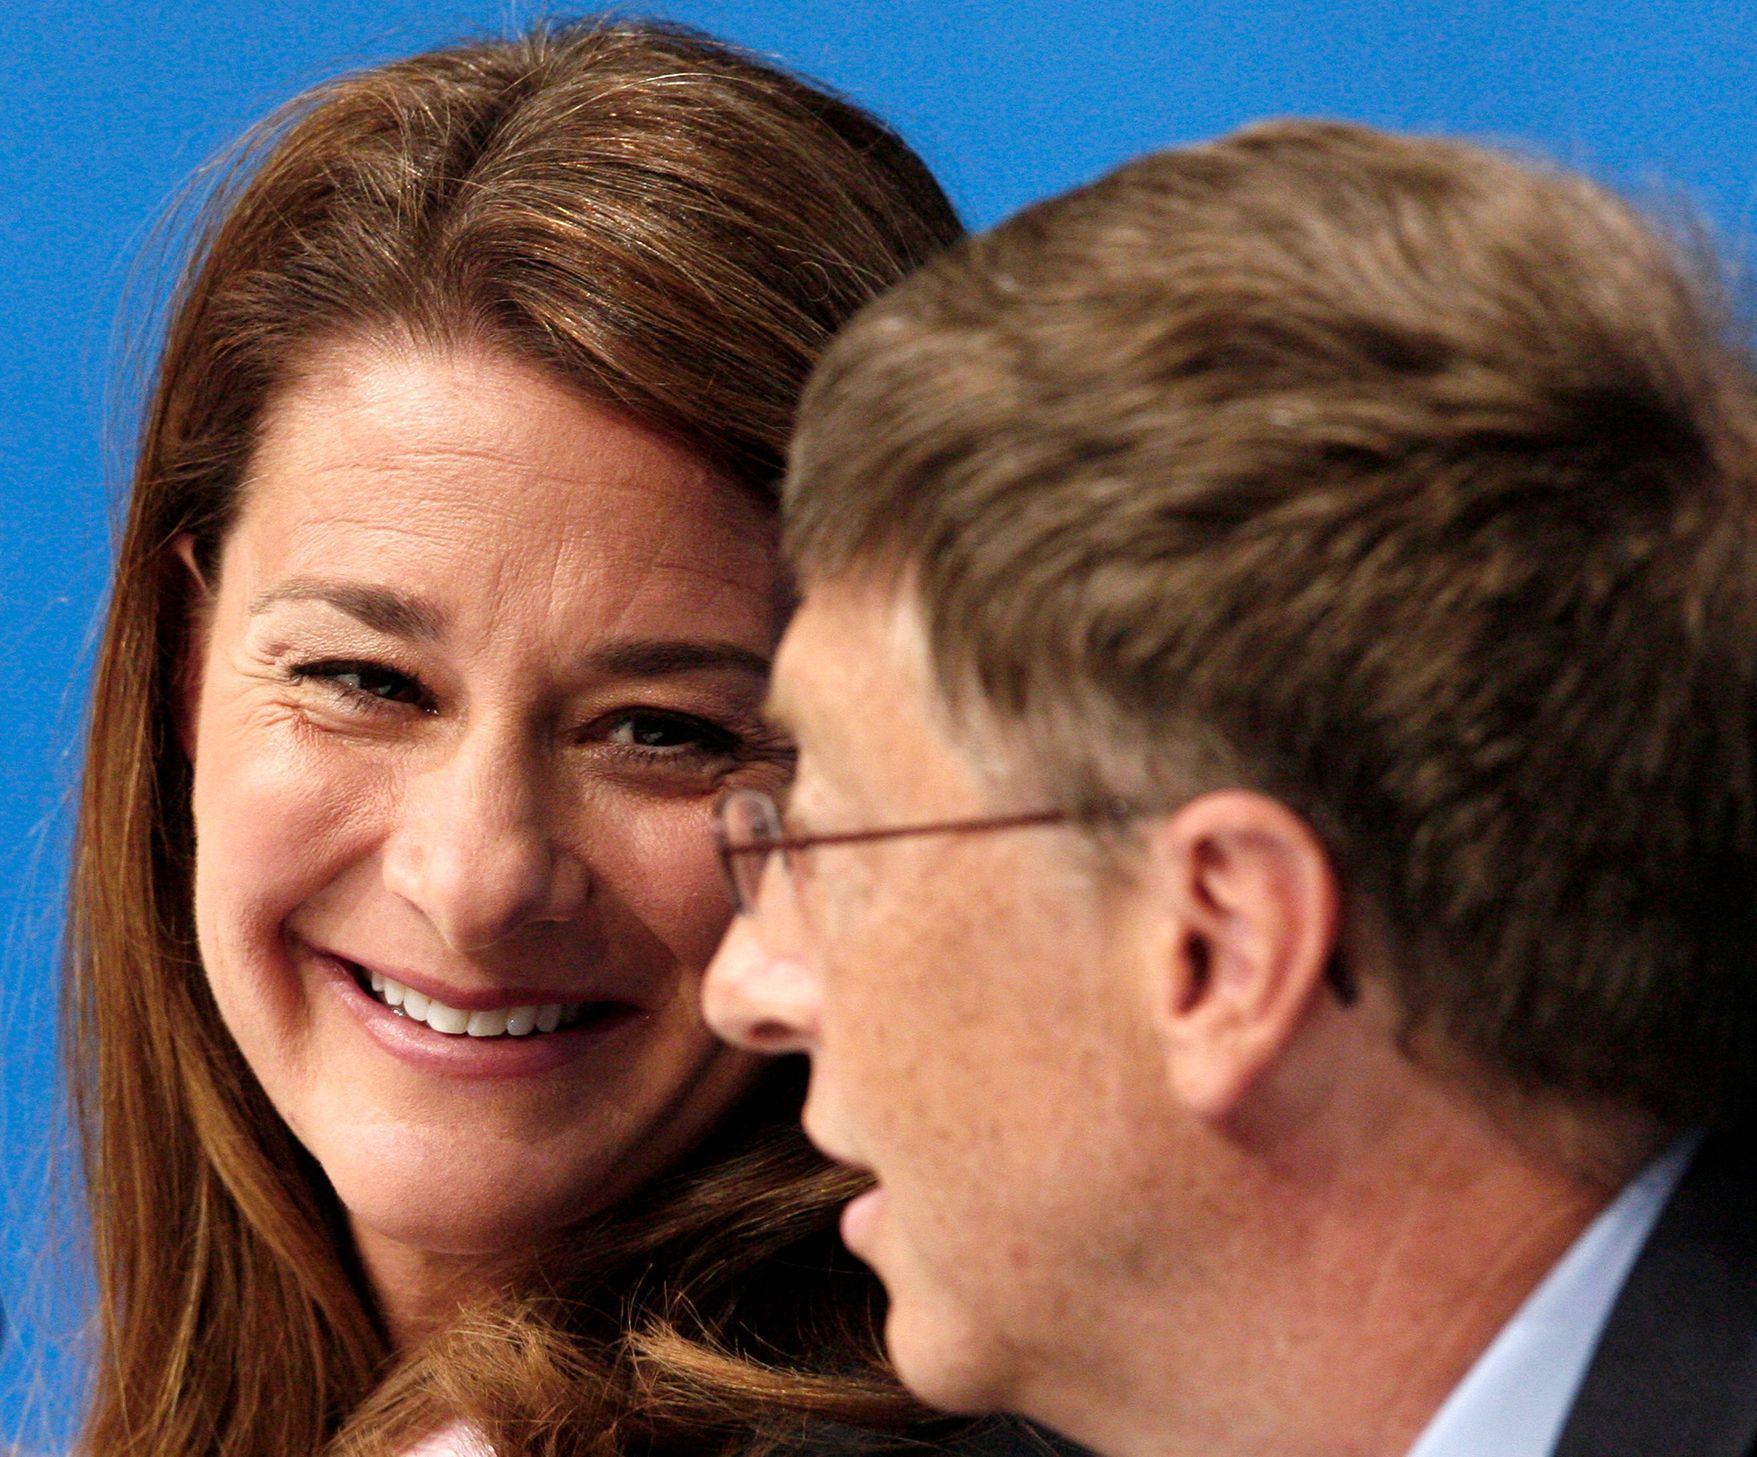 FILE PHOTO: Melinda Gates smiles at husband during the opening news conference for AIDS 2006 in Toronto